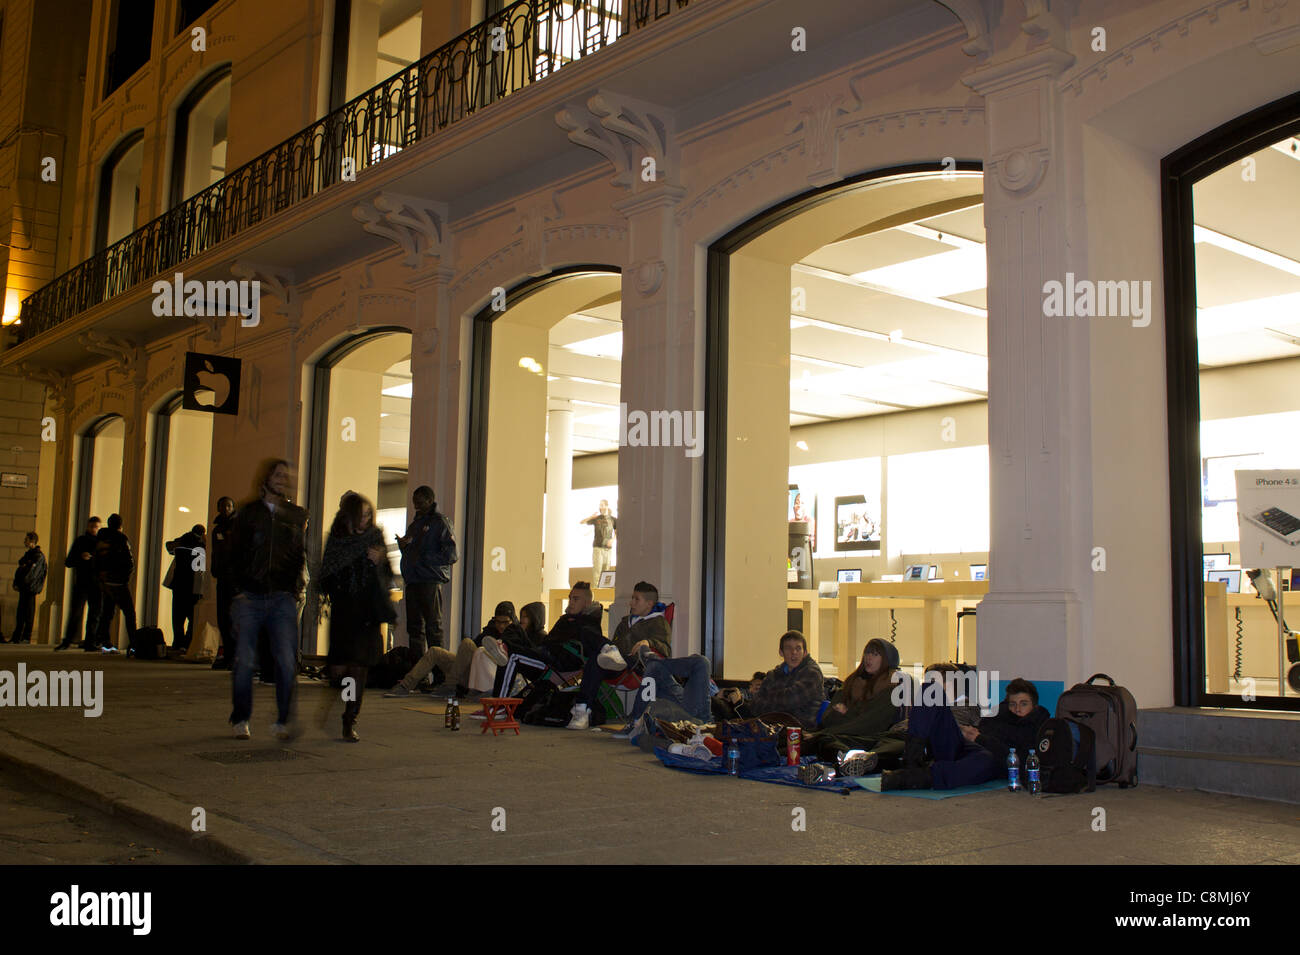 Page 2 - Store Queue High Resolution Stock Photography and Images - Alamy